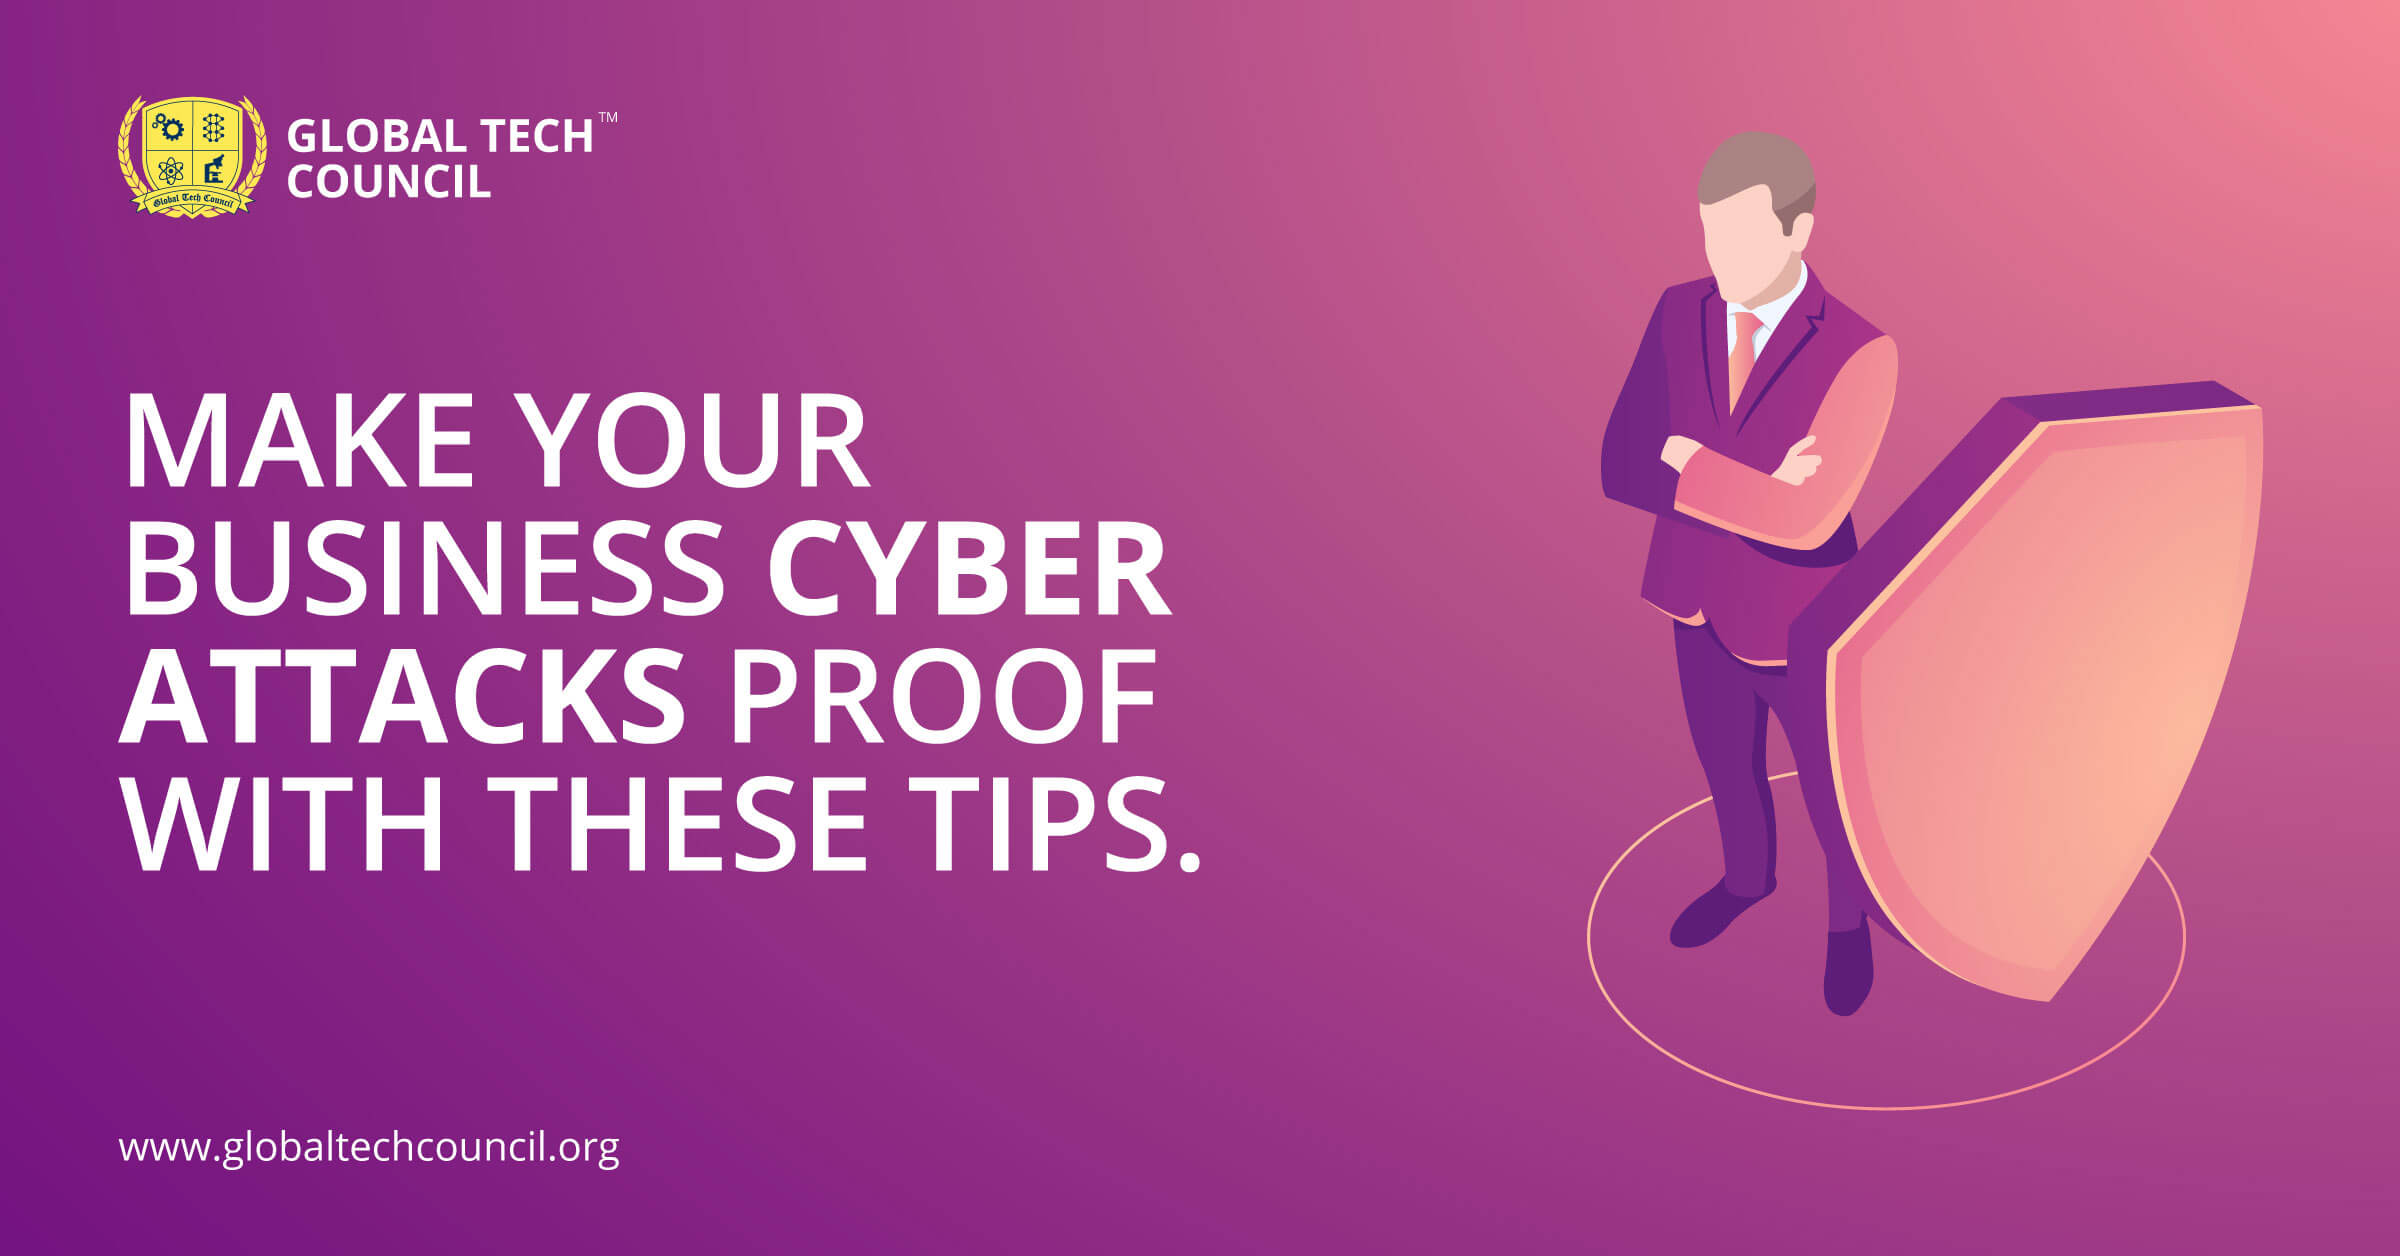 Make-your-business-cyber-attacks-proof-with-these-tips